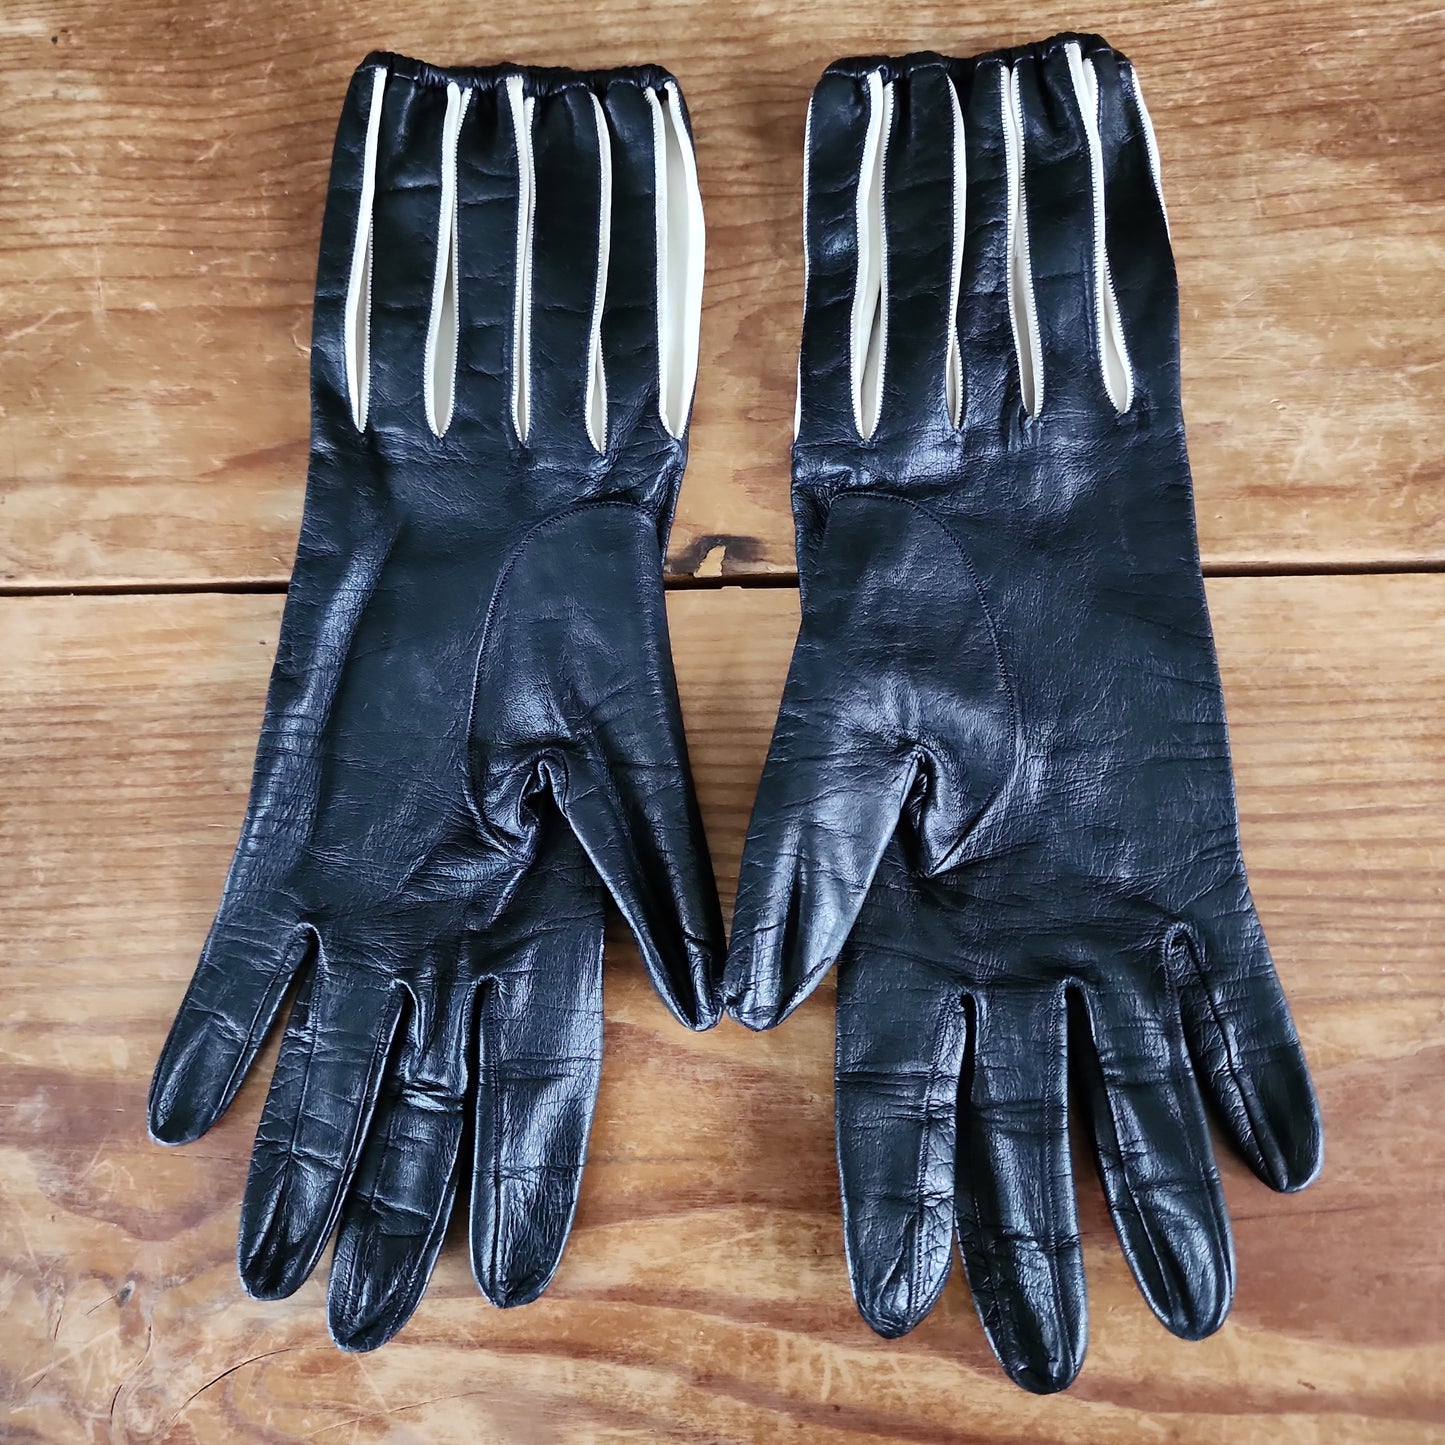 1940s Black Leather Gloves with Cut Outs for Balloon Wrist Jester Style